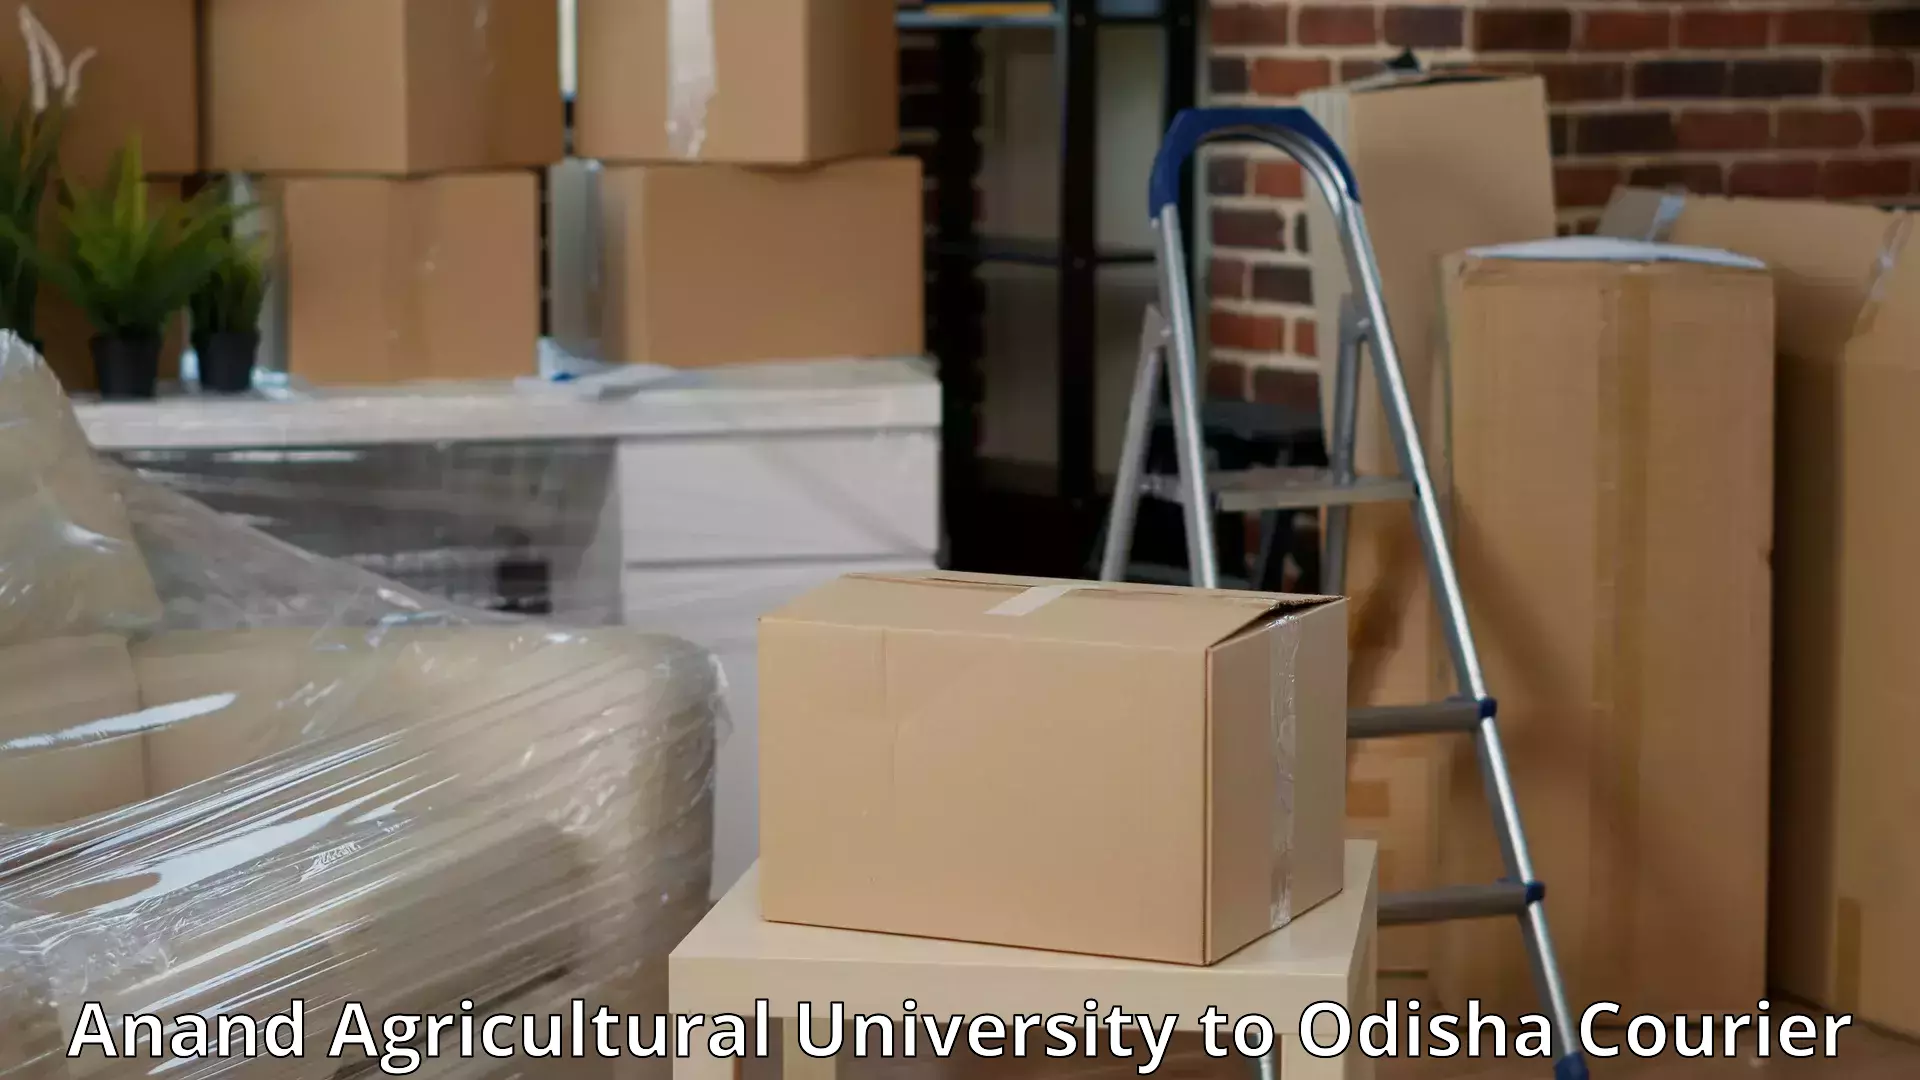 Efficient packing and moving Anand Agricultural University to Titilagarh